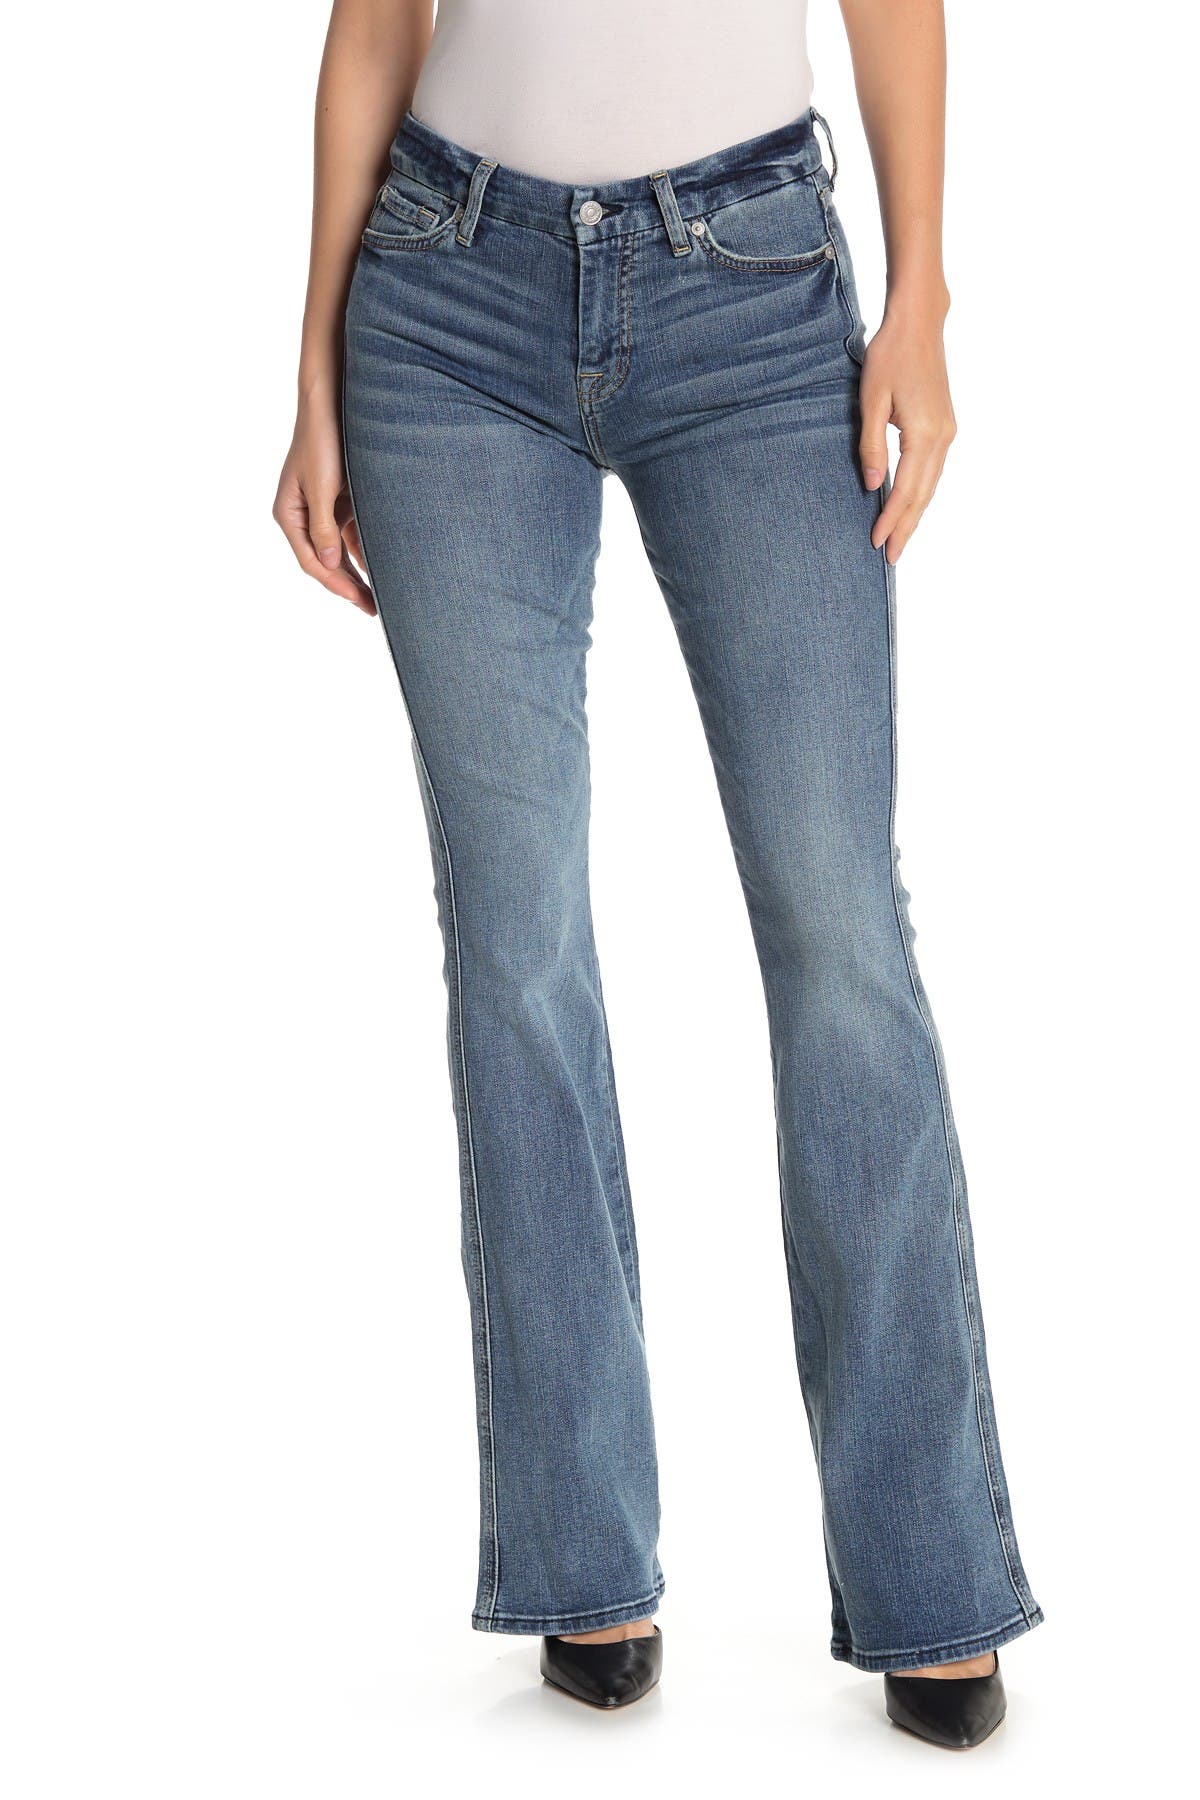 7 for all mankind a pocket jeans